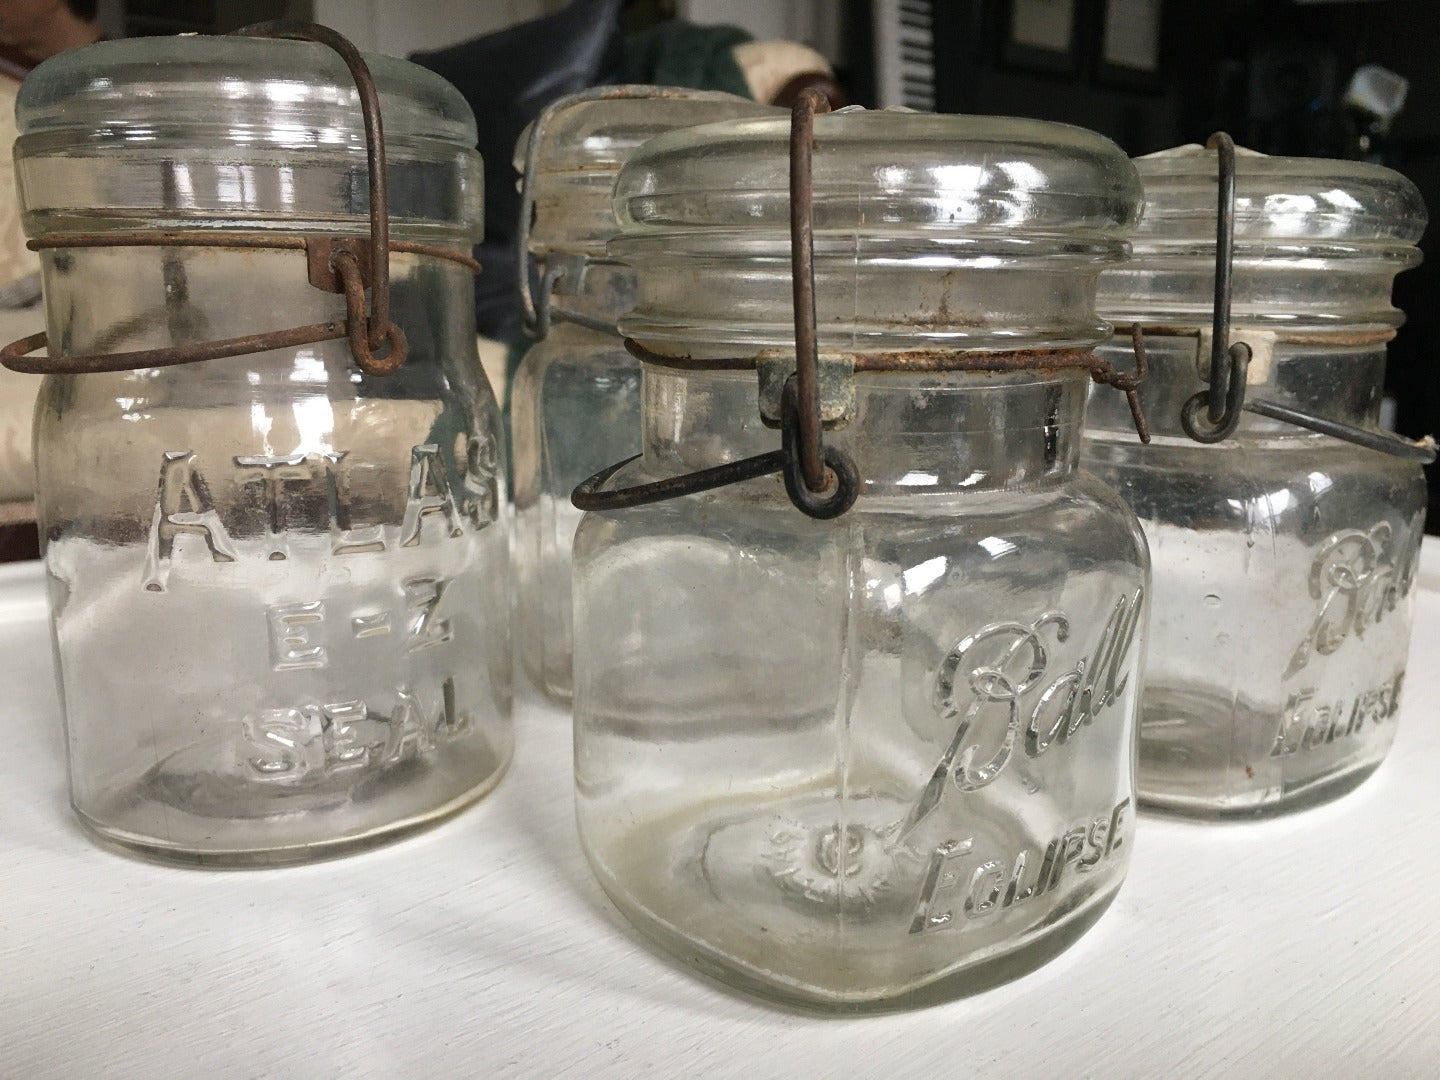 Small Canning Jars